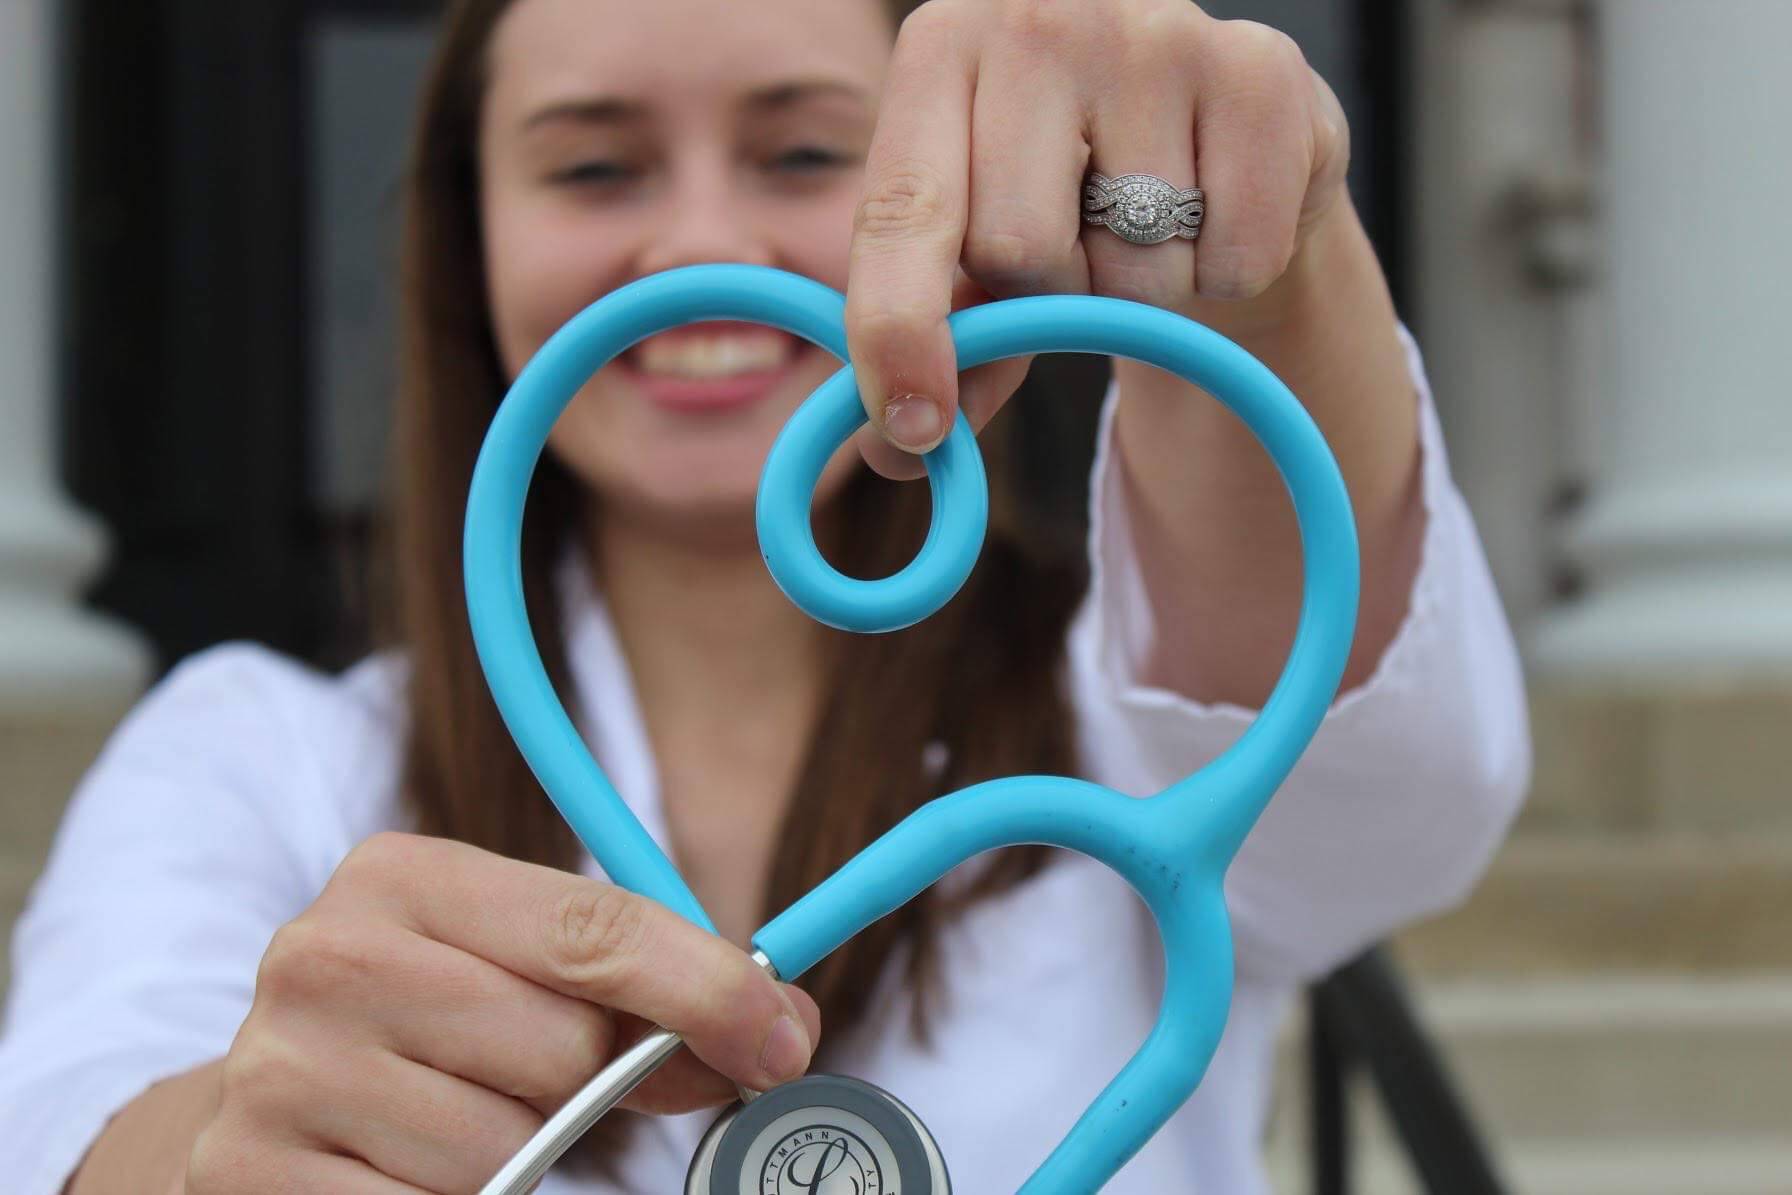 ROTC Nursing Cadet holding up a stethoscope in the shape of a heart